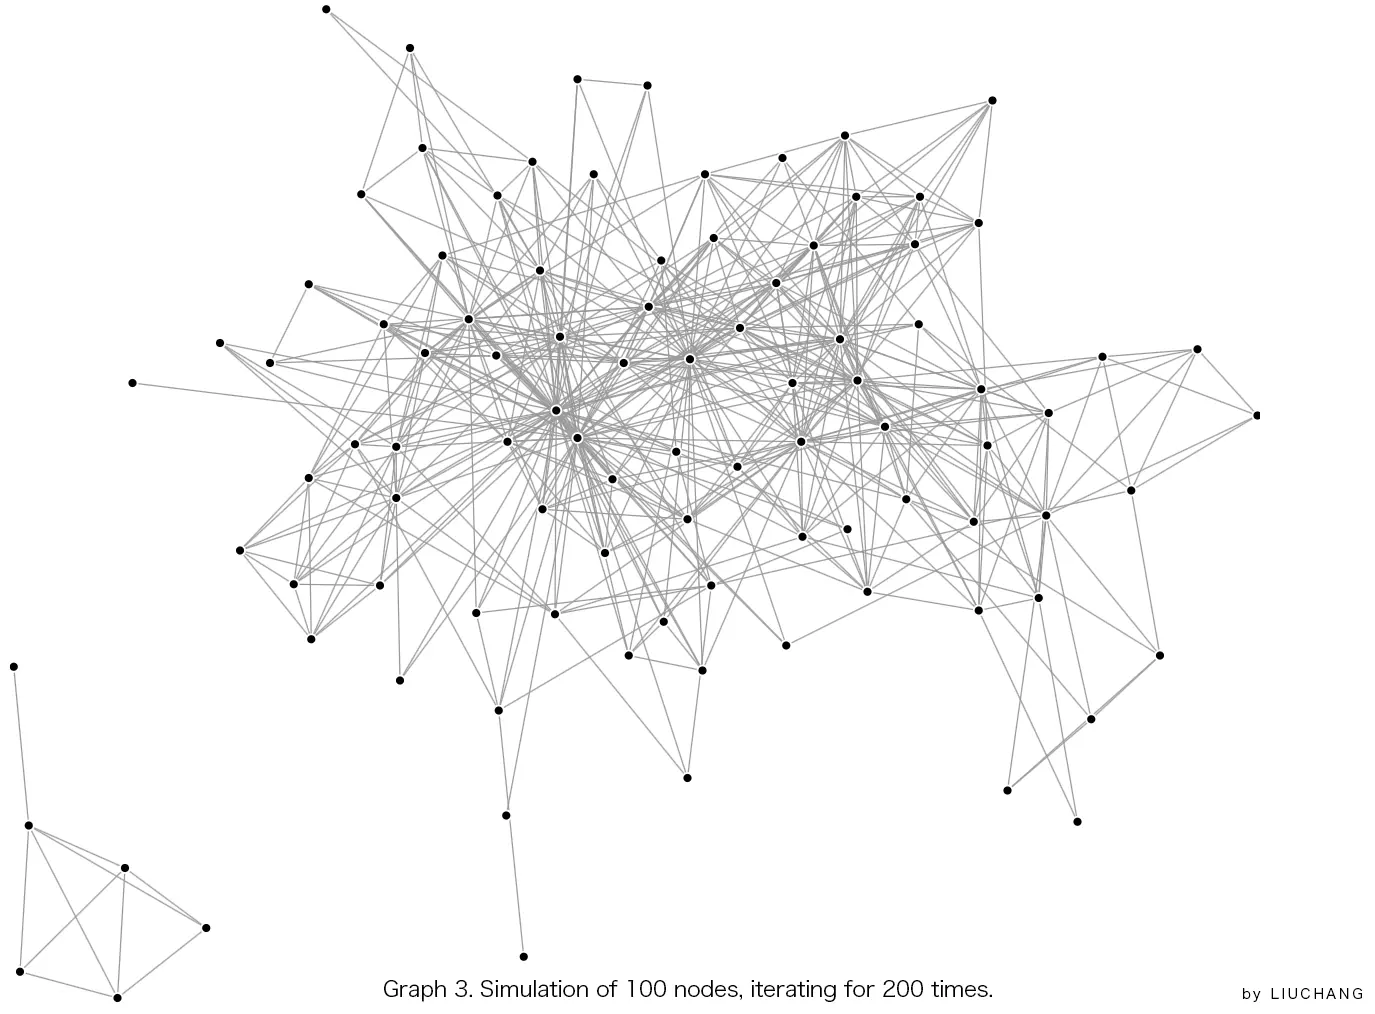 Graph 3. Simulation of 100 nodes, iterating for 200 times.